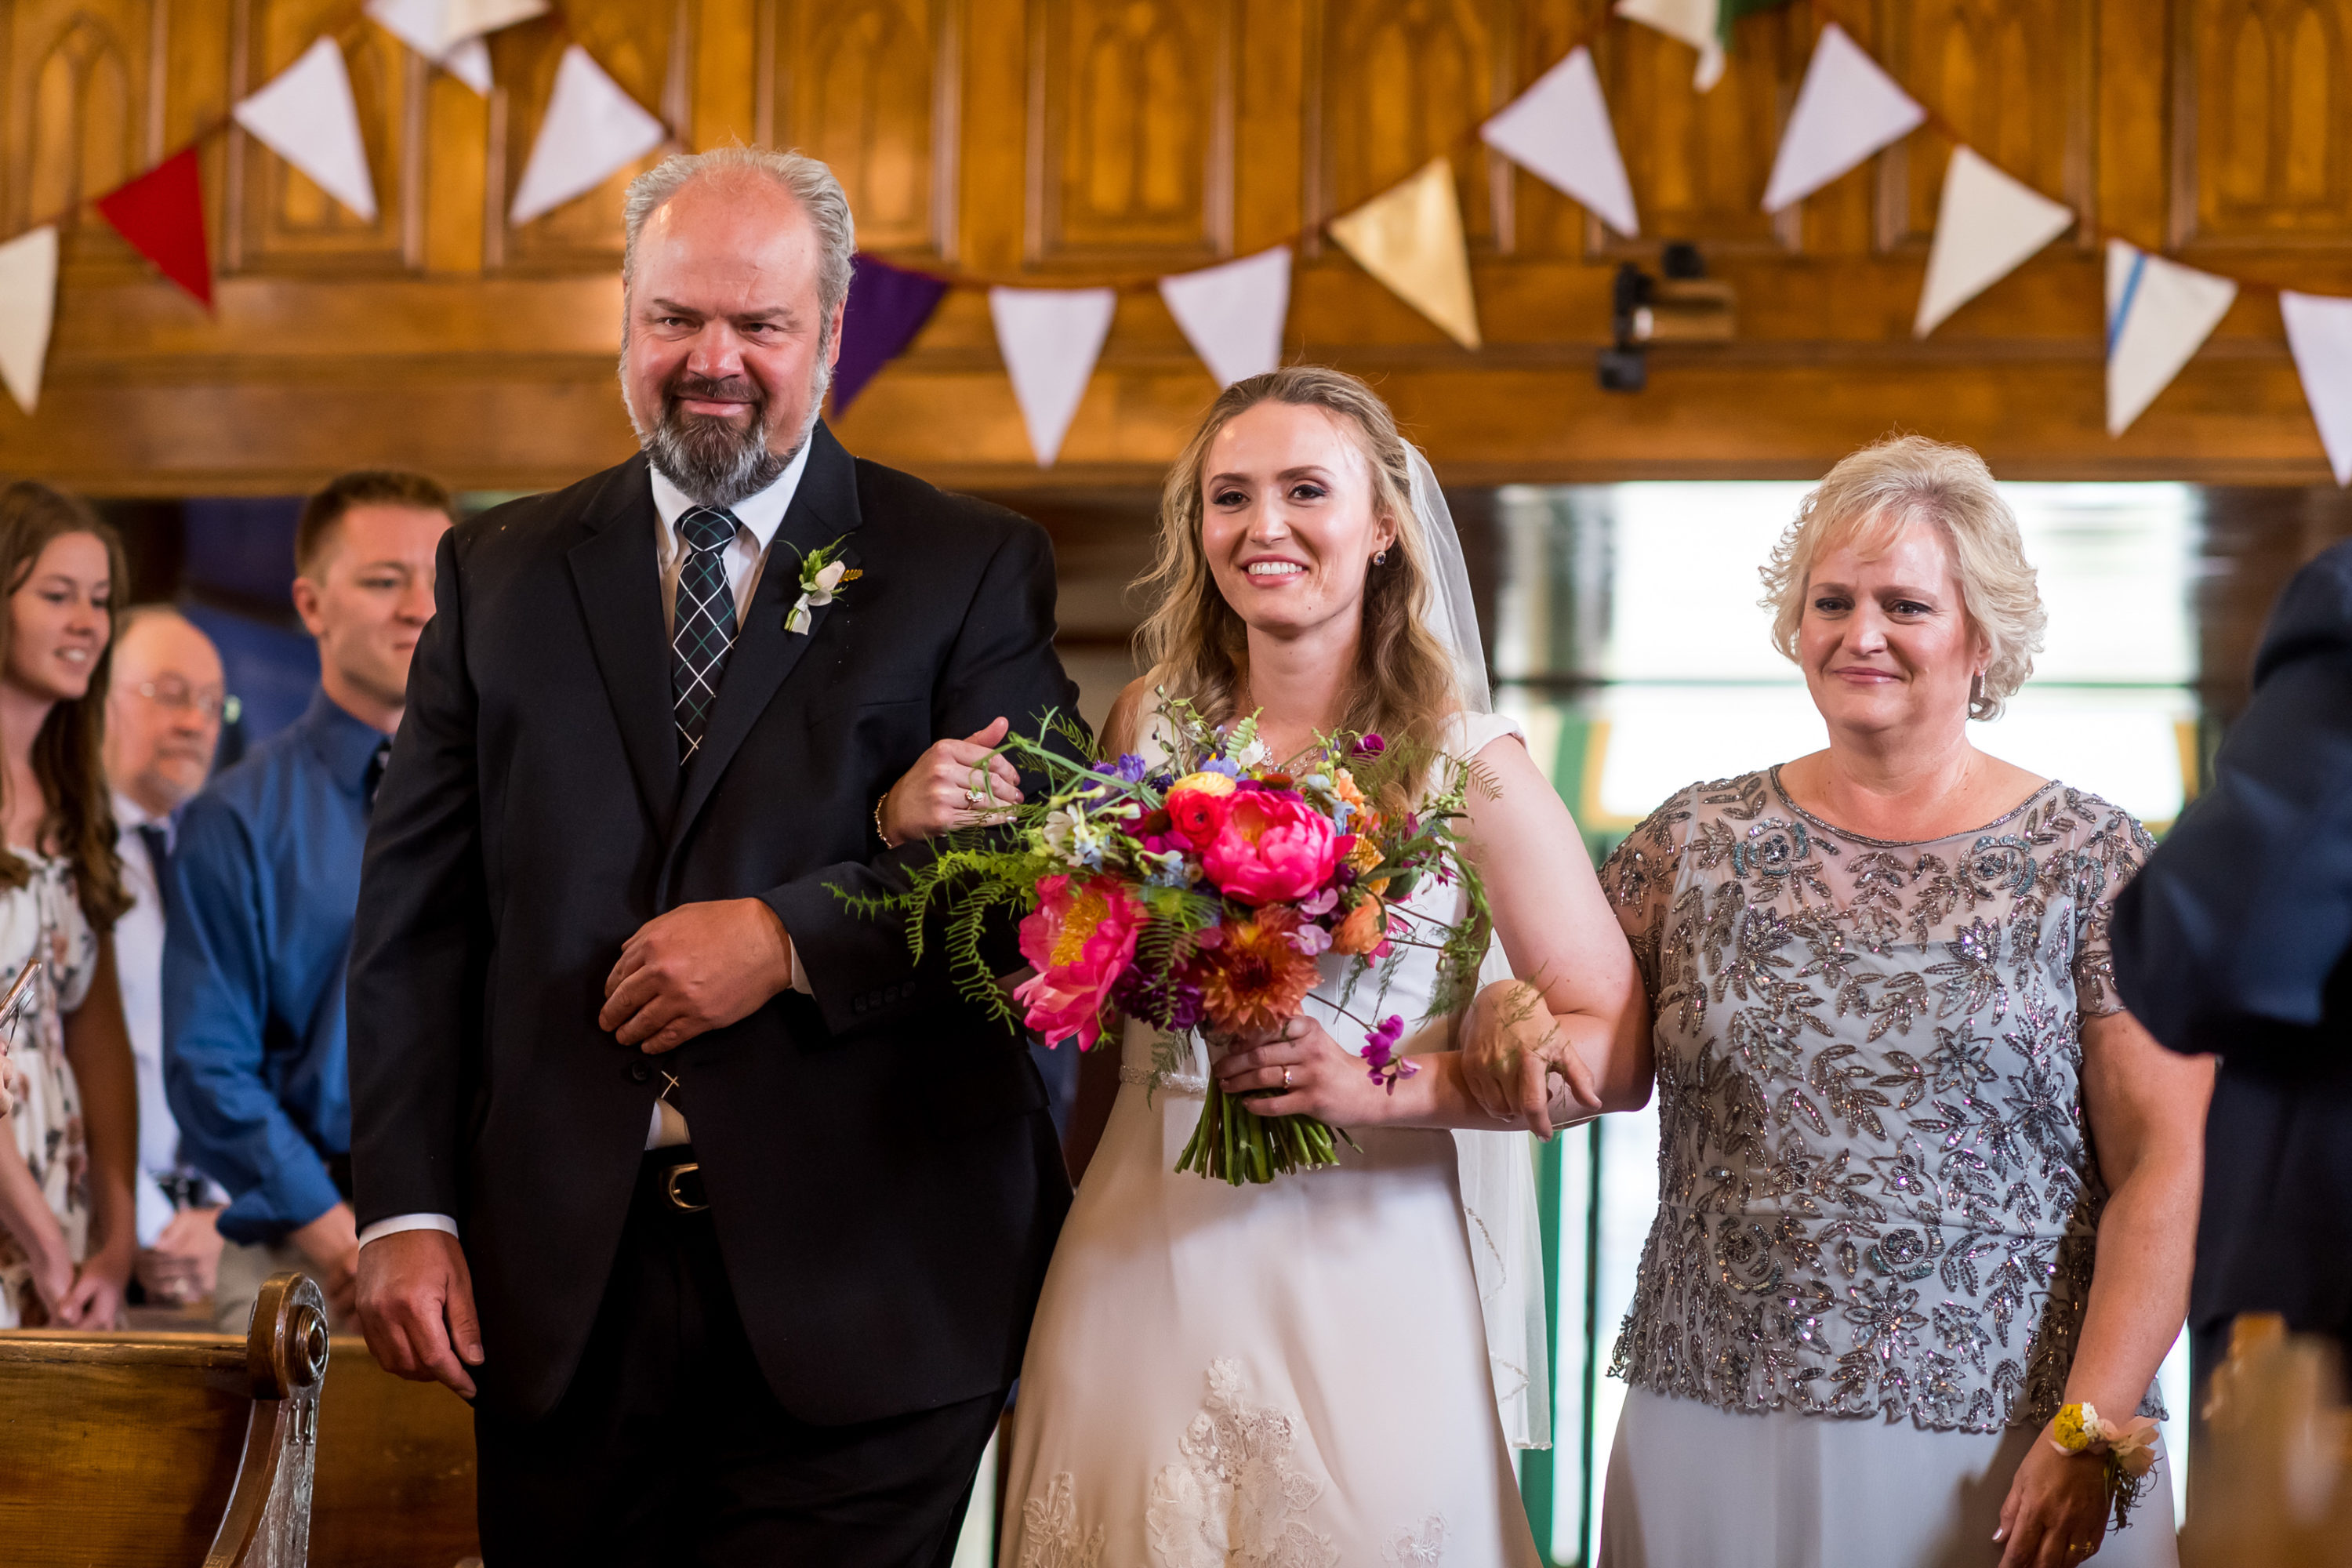 The bride and her mother and father walk down the aisle during their Telluride, Colorado, wedding at St. Patrick's Catholic Church.